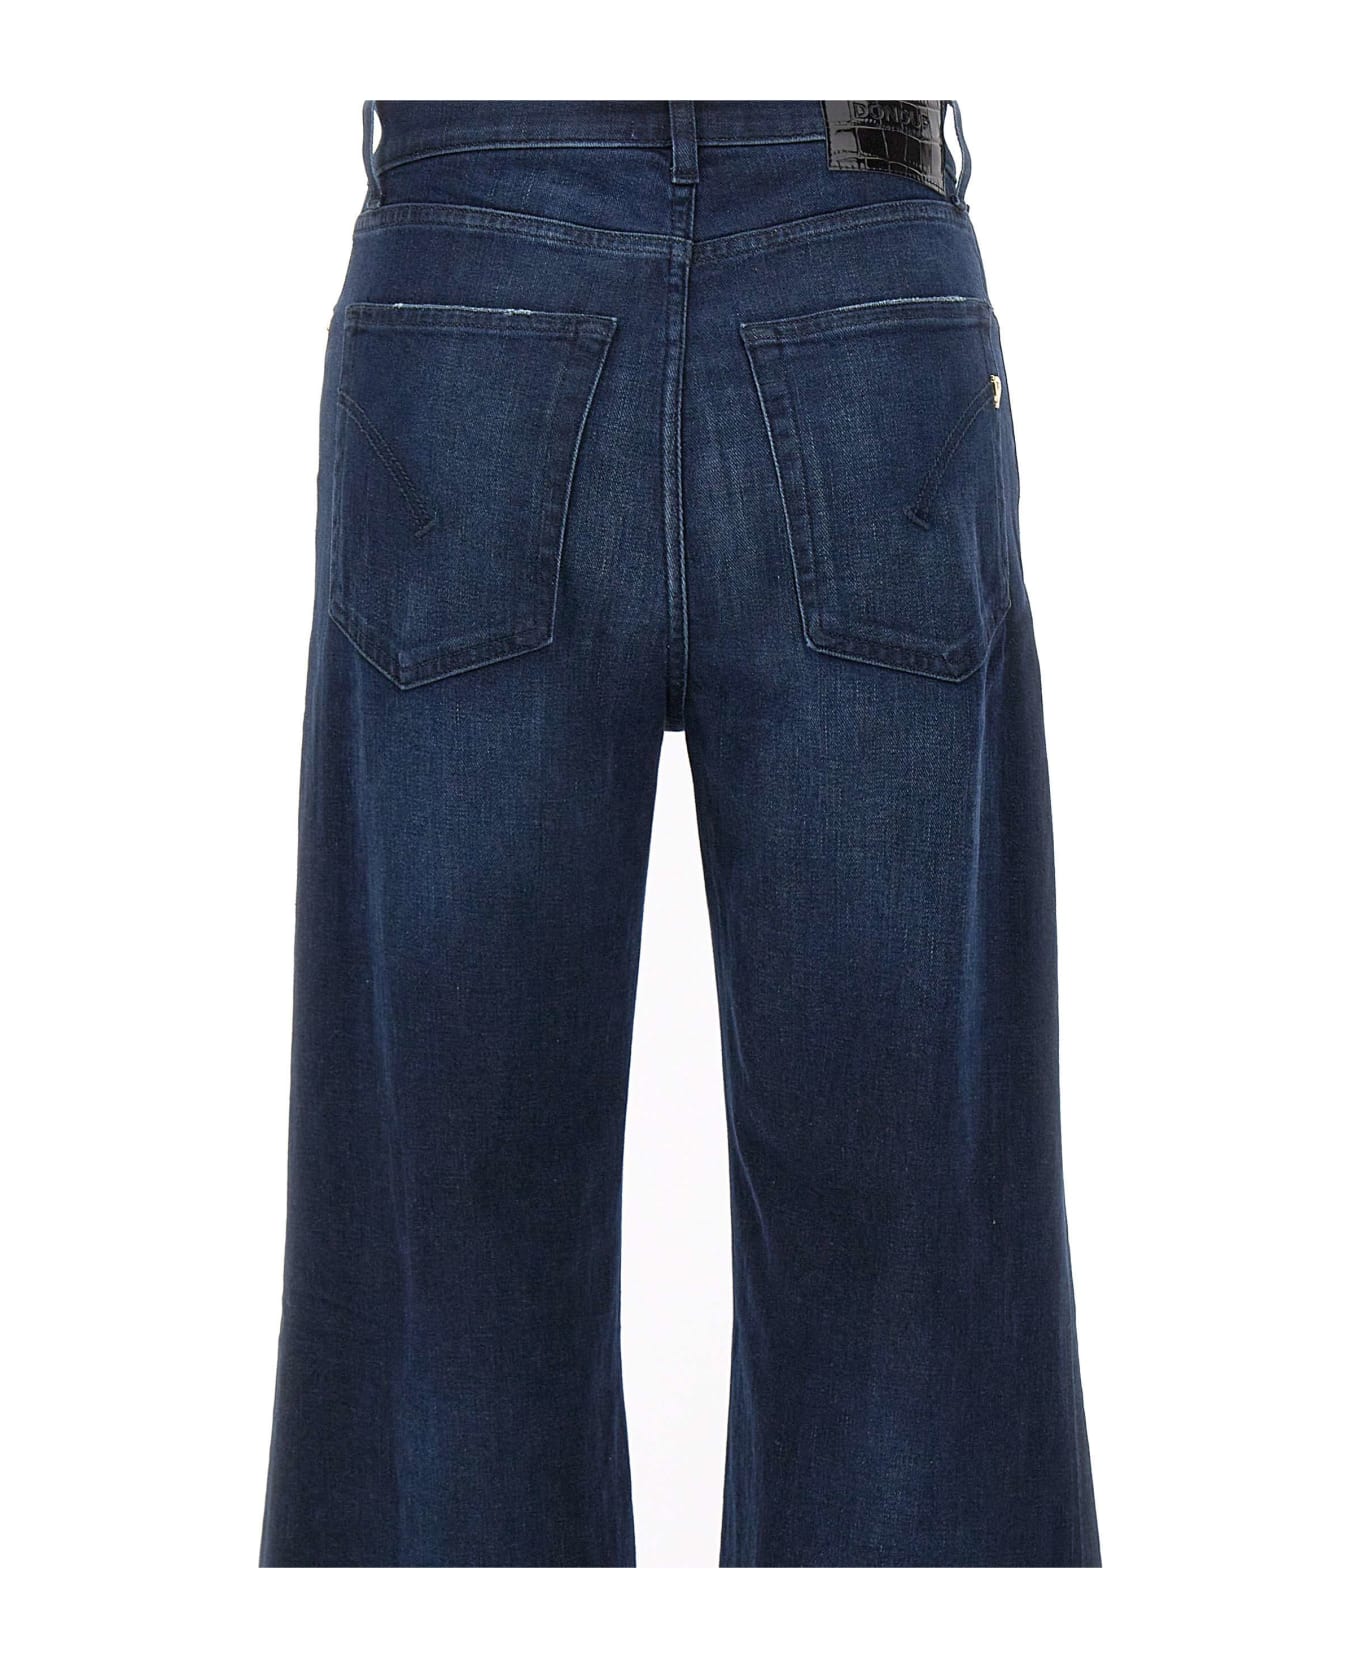 Dondup 'amber' Jeans - BLUE